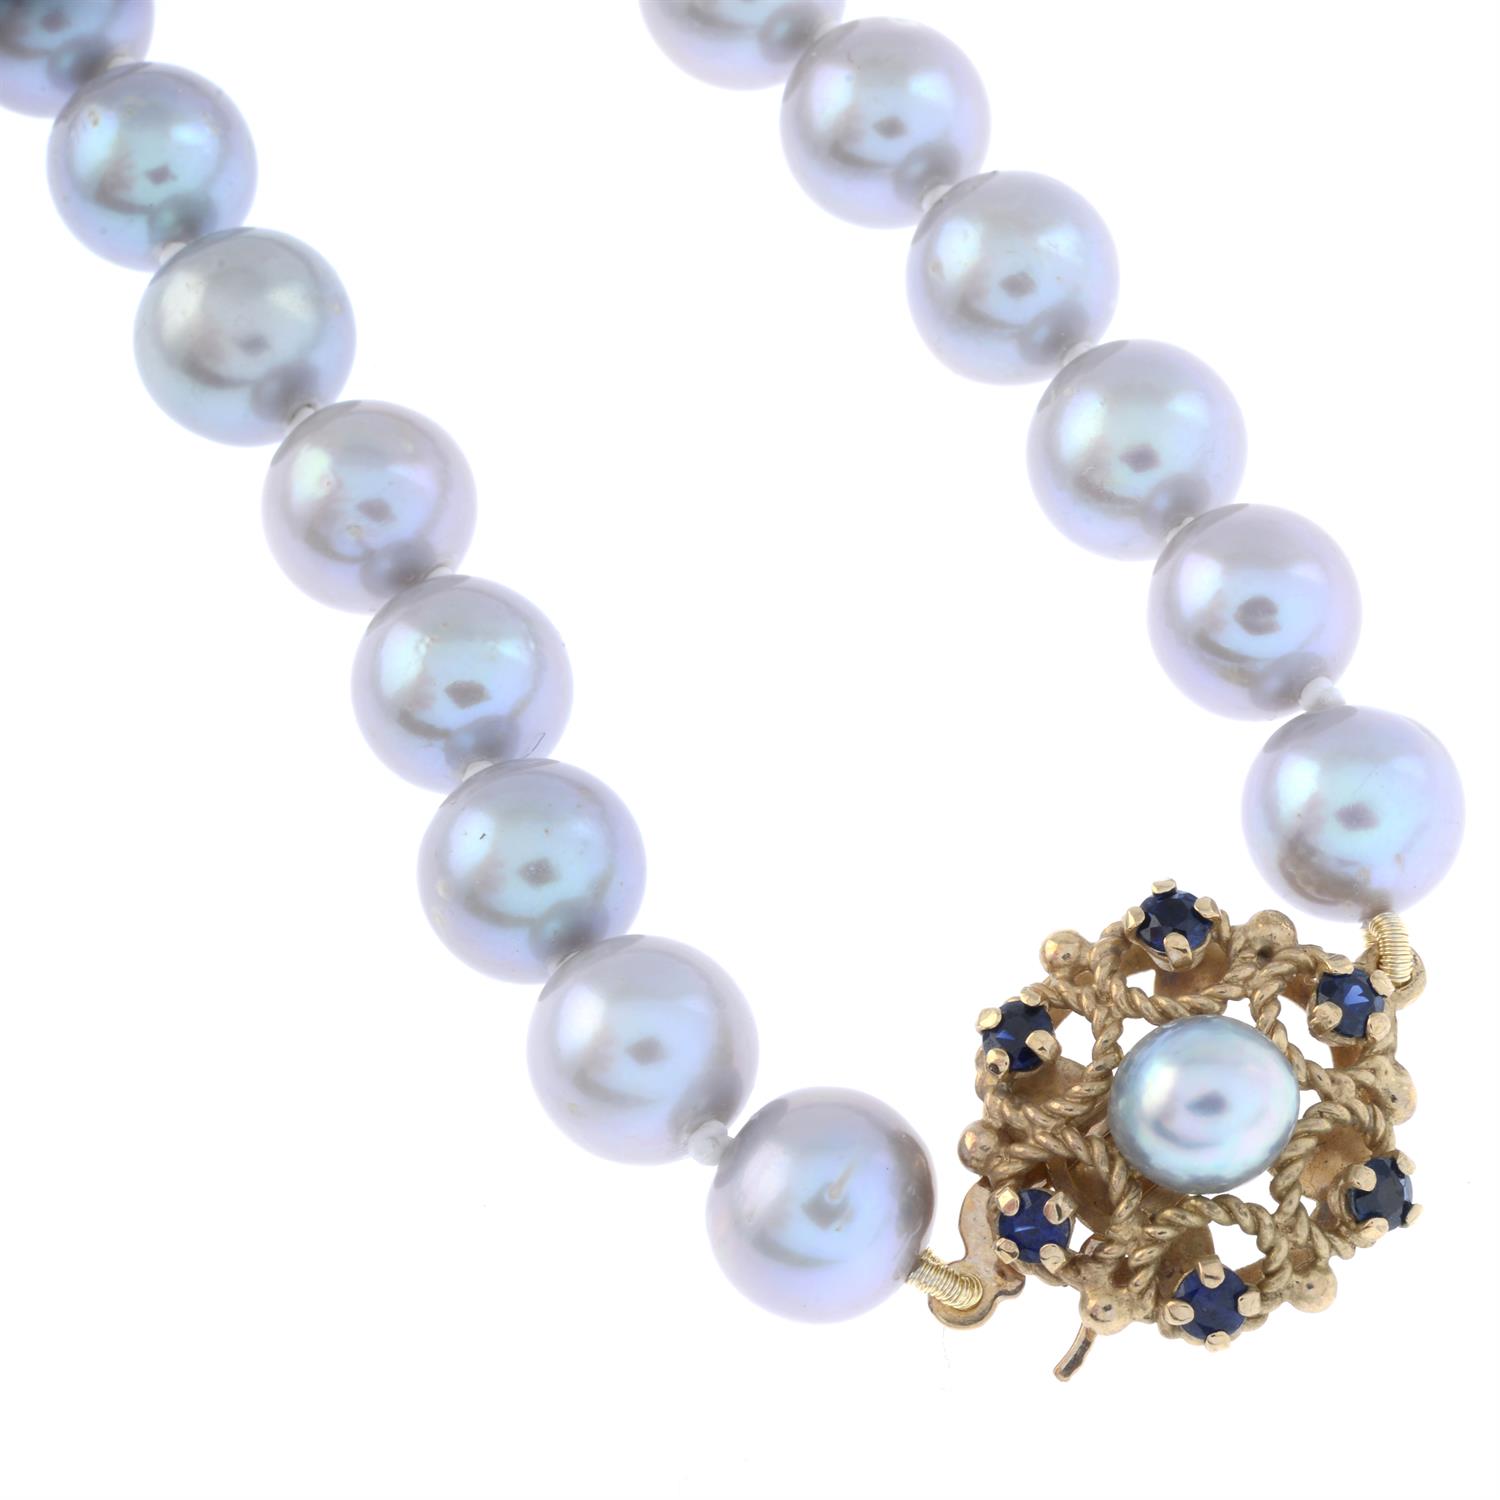 9ct gold cultured pearl & sapphire necklace - Image 2 of 3